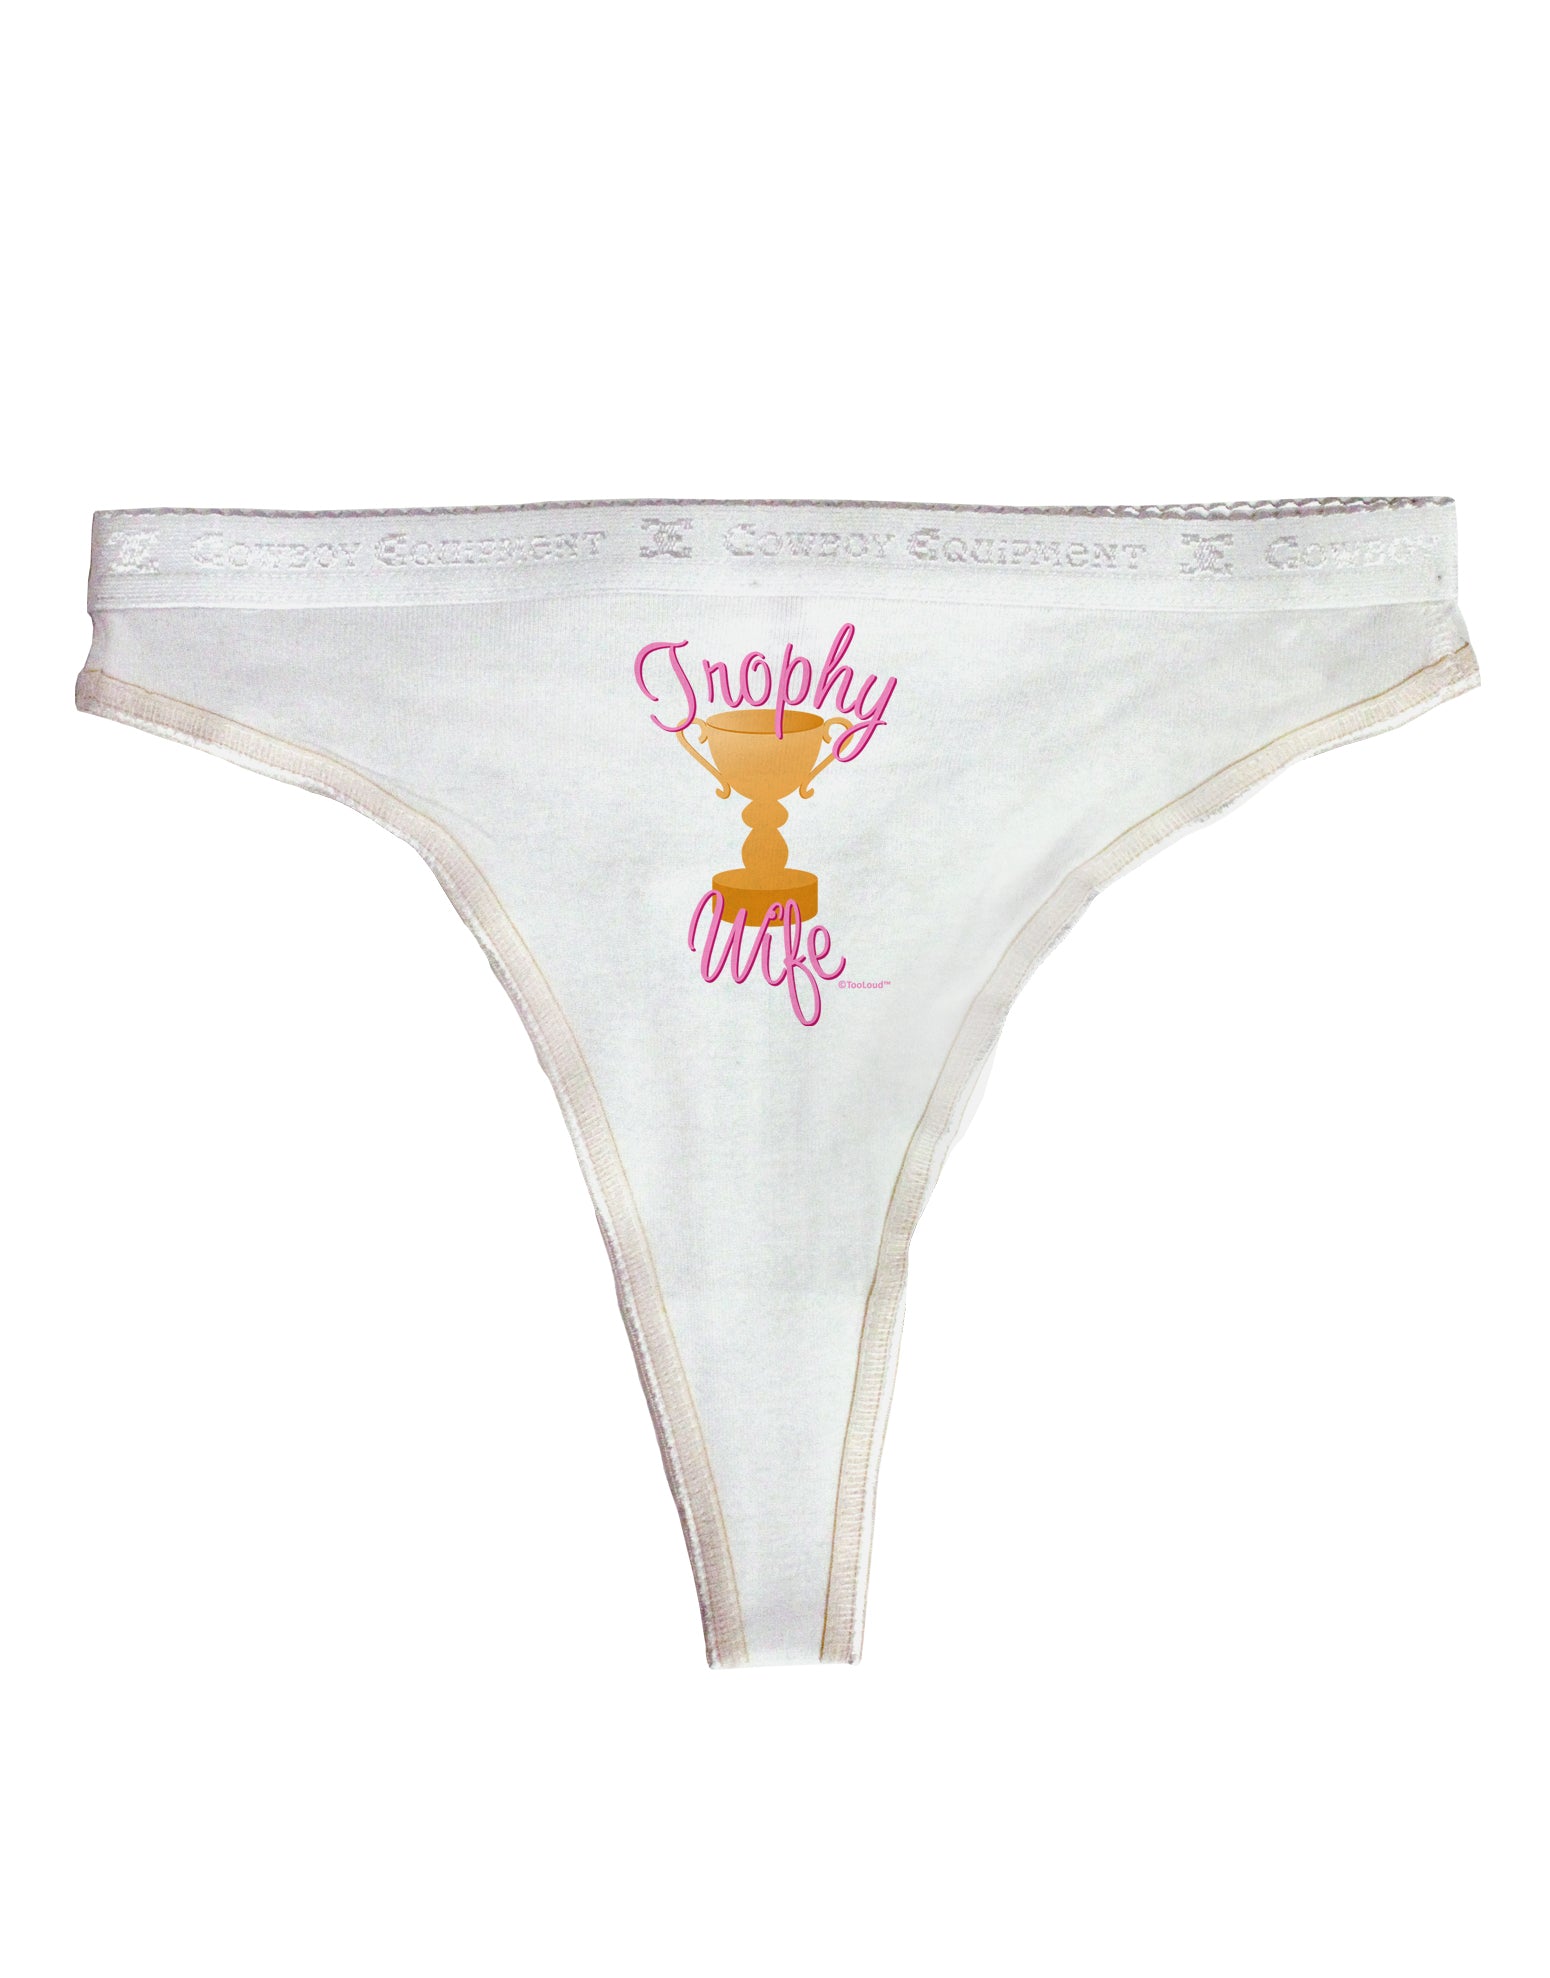 Trophy Wife Design Womens Thong Underwear by TooLoud